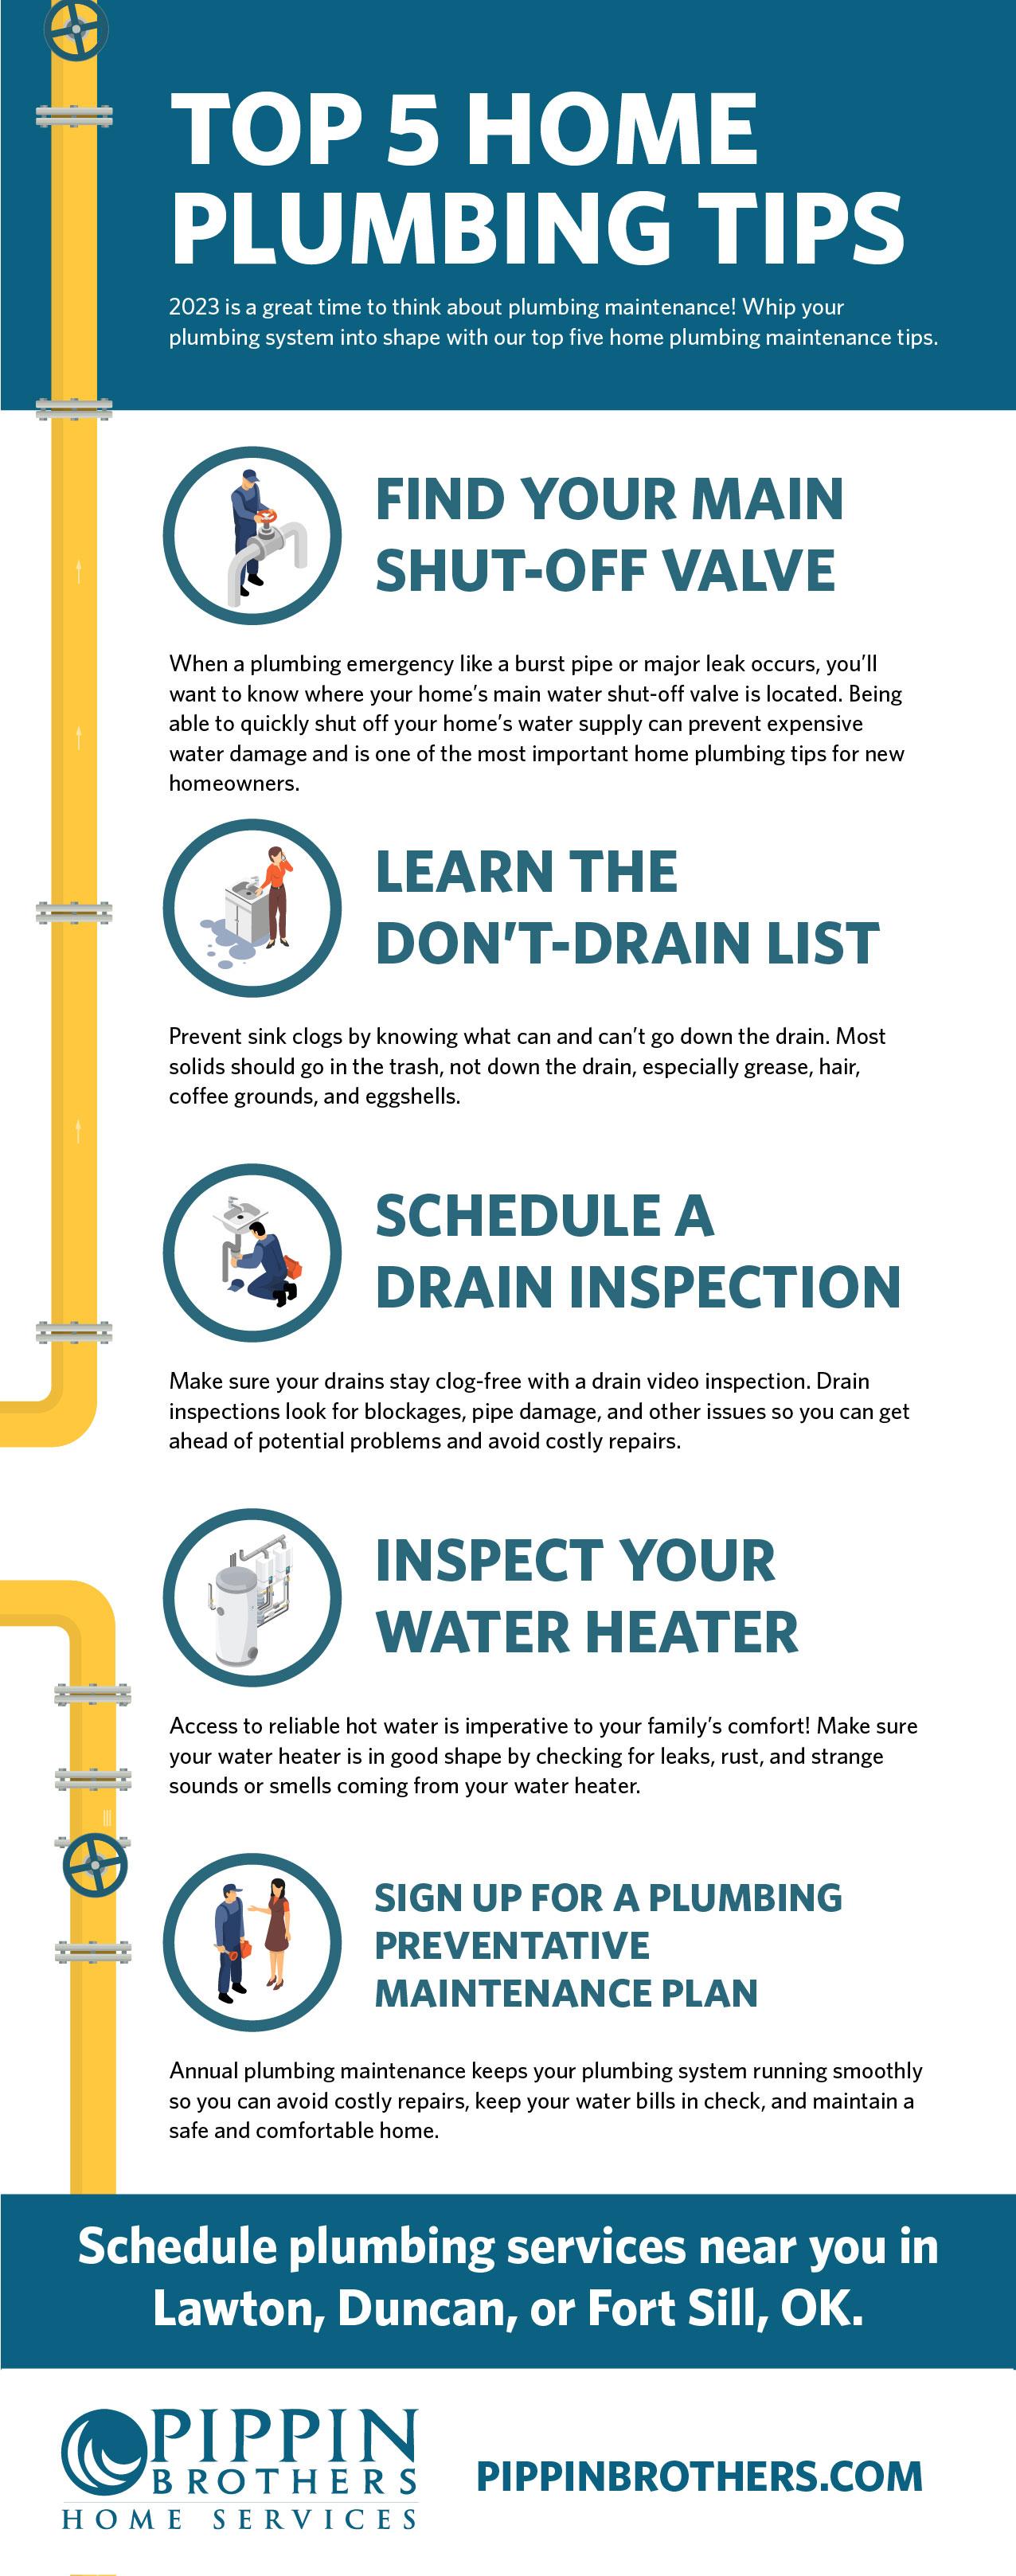 Image of infographic explaining Top 5 Home Plumbing Tips